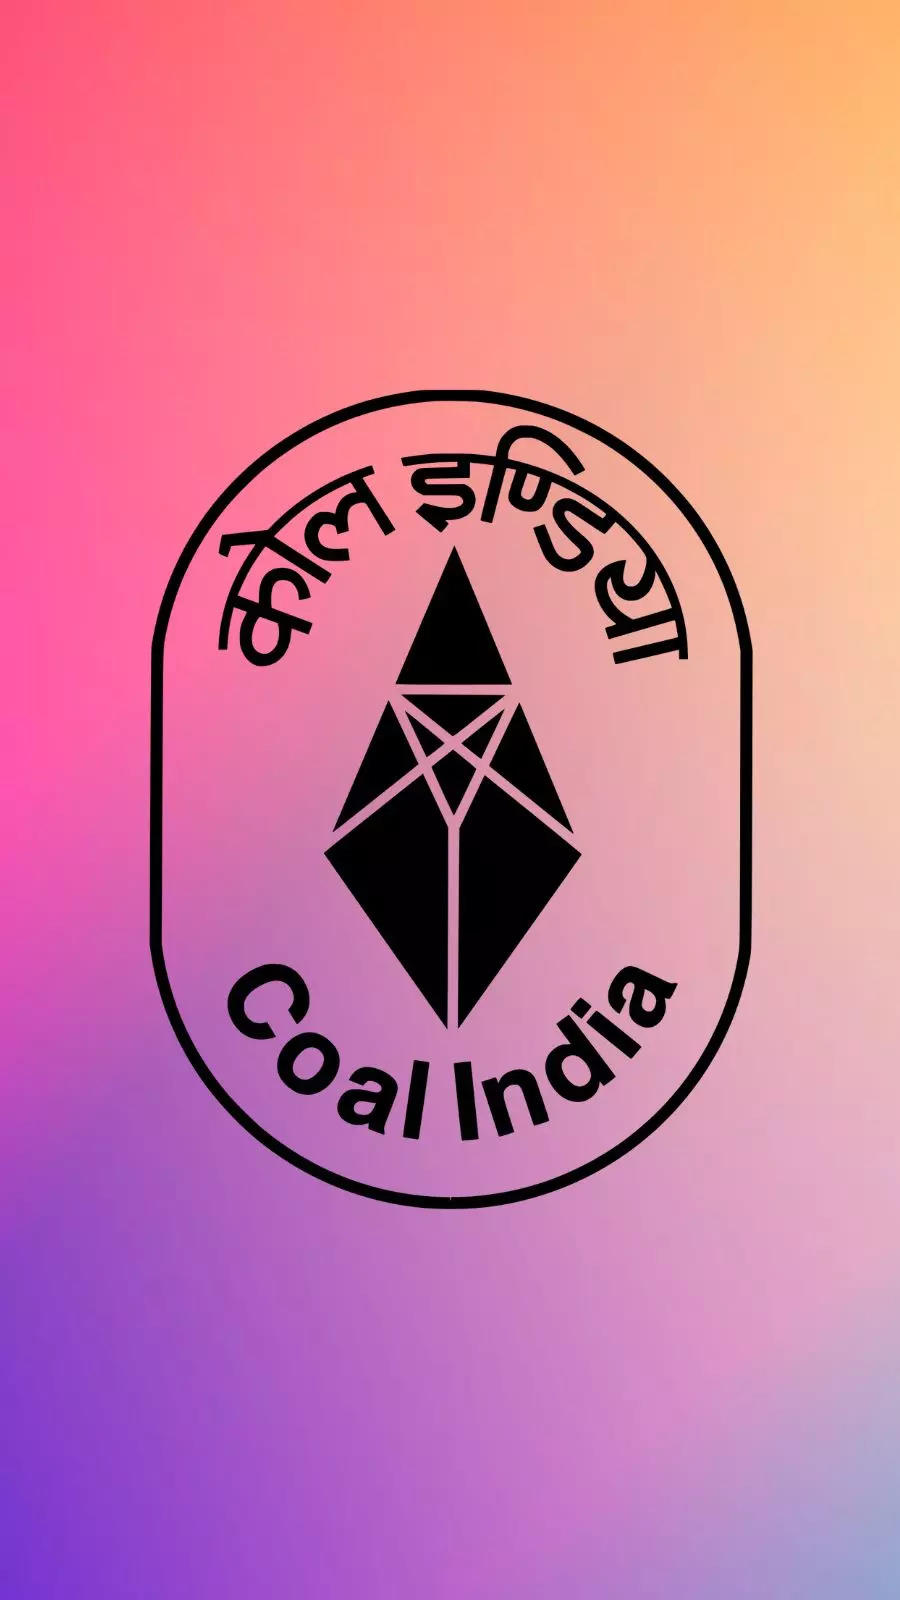 Coal India logo in transparent PNG and vectorized SVG formats